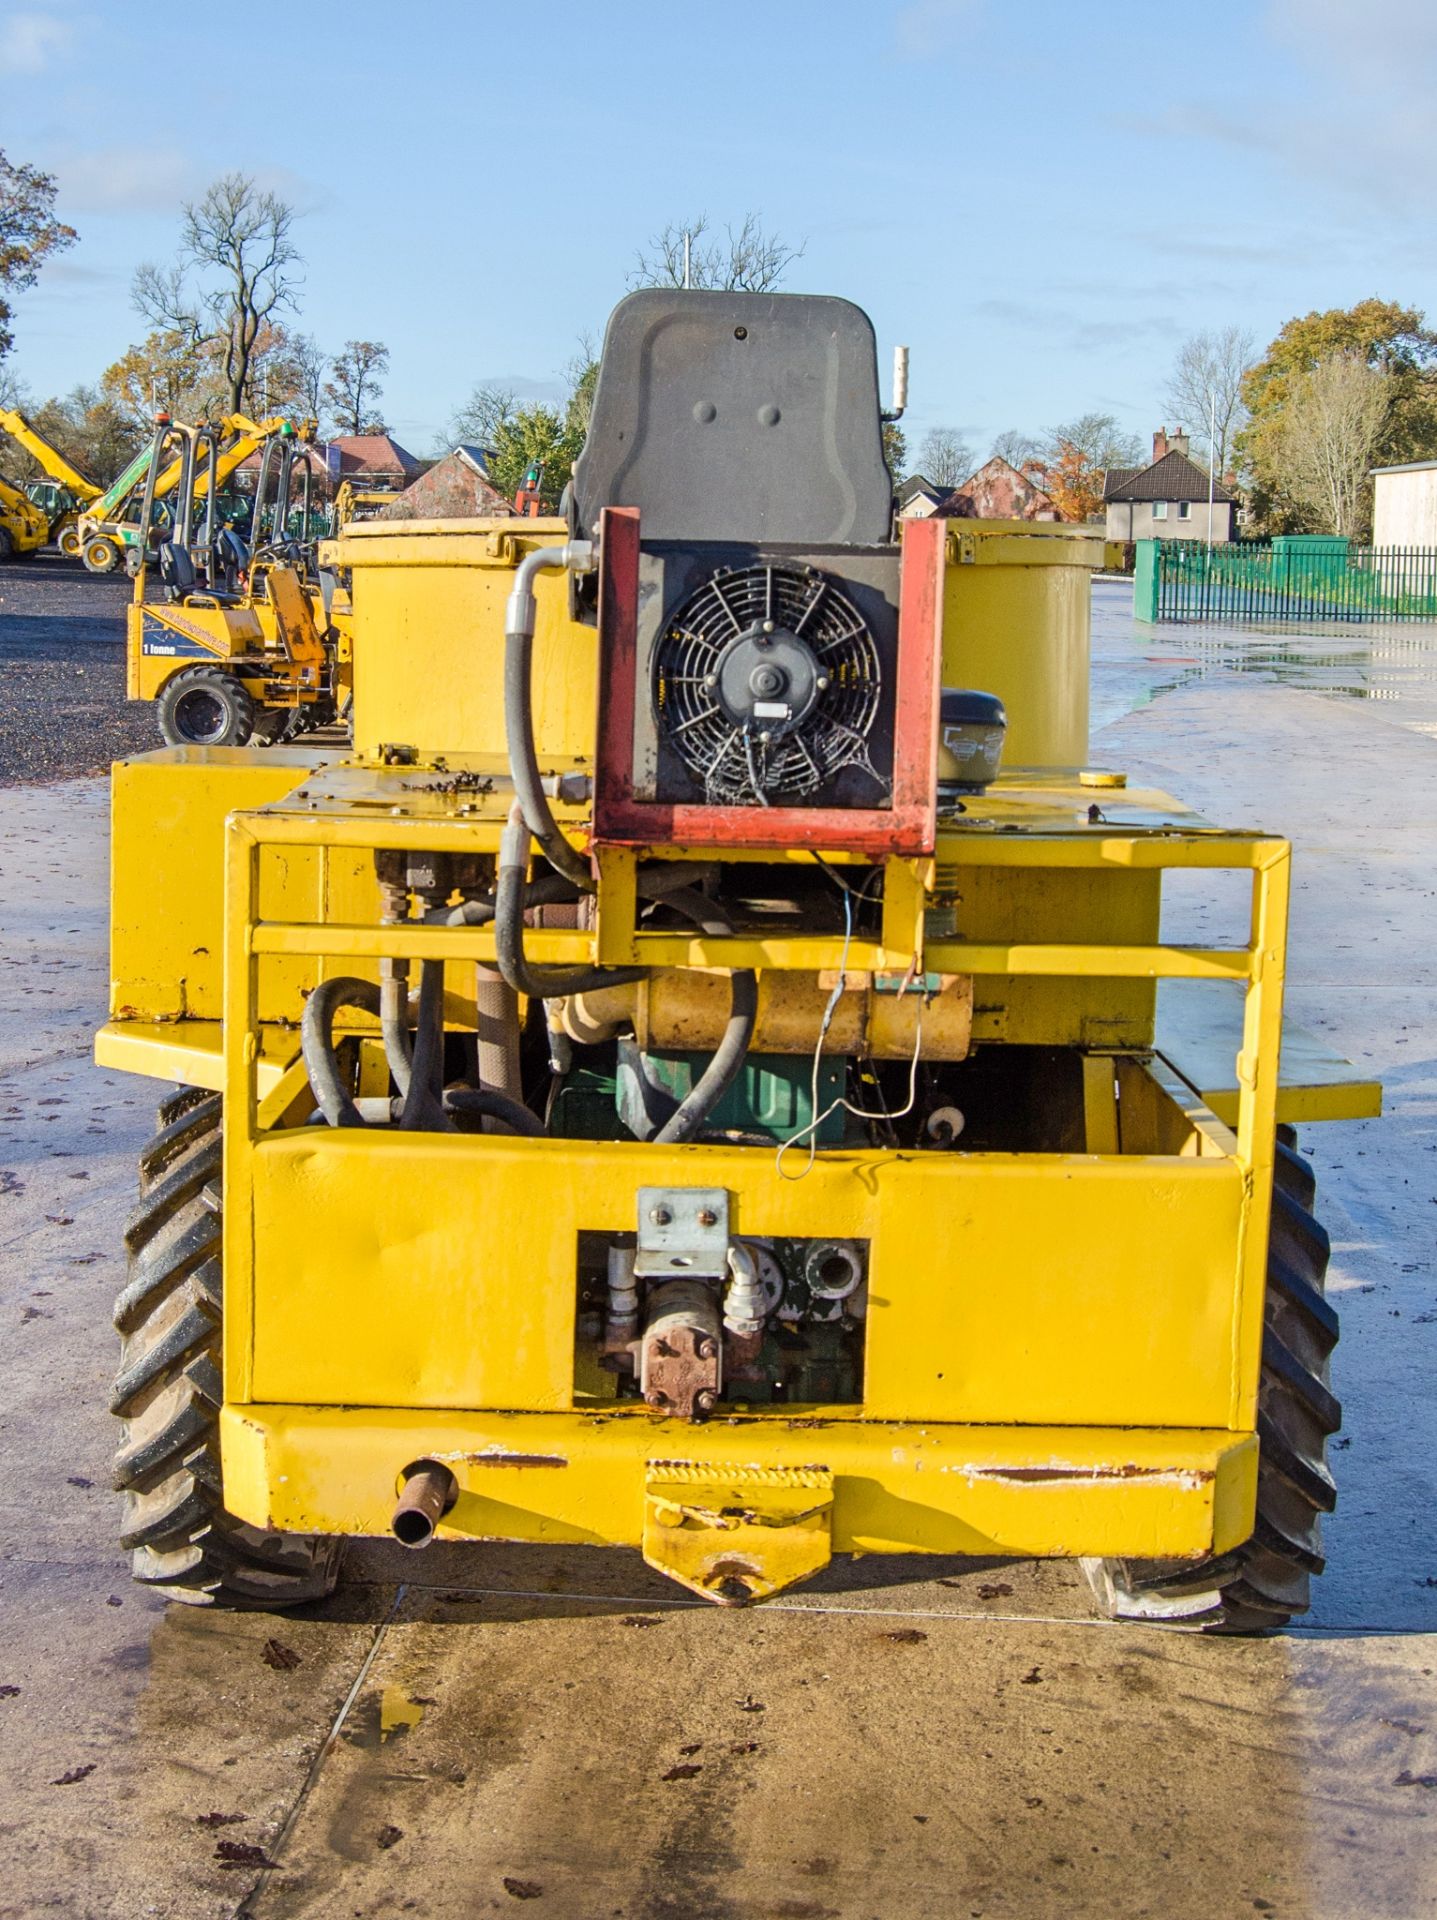 Mobile hydraulic pan mixer converted from a 3 tonne dumper - Image 6 of 19